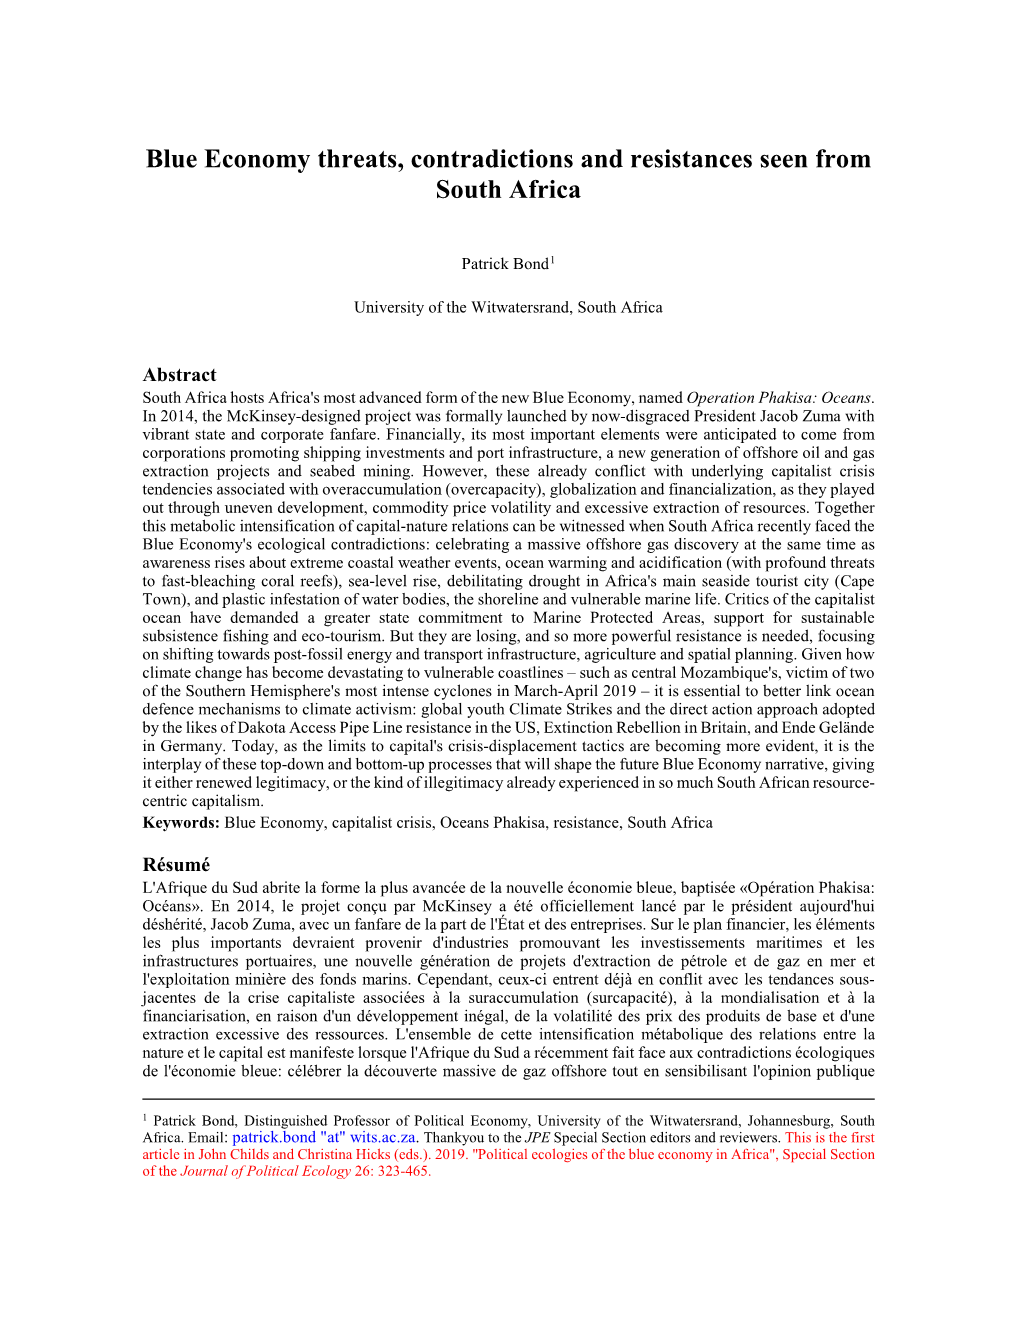 Blue Economy Threats, Contradictions and Resistances Seen from South Africa